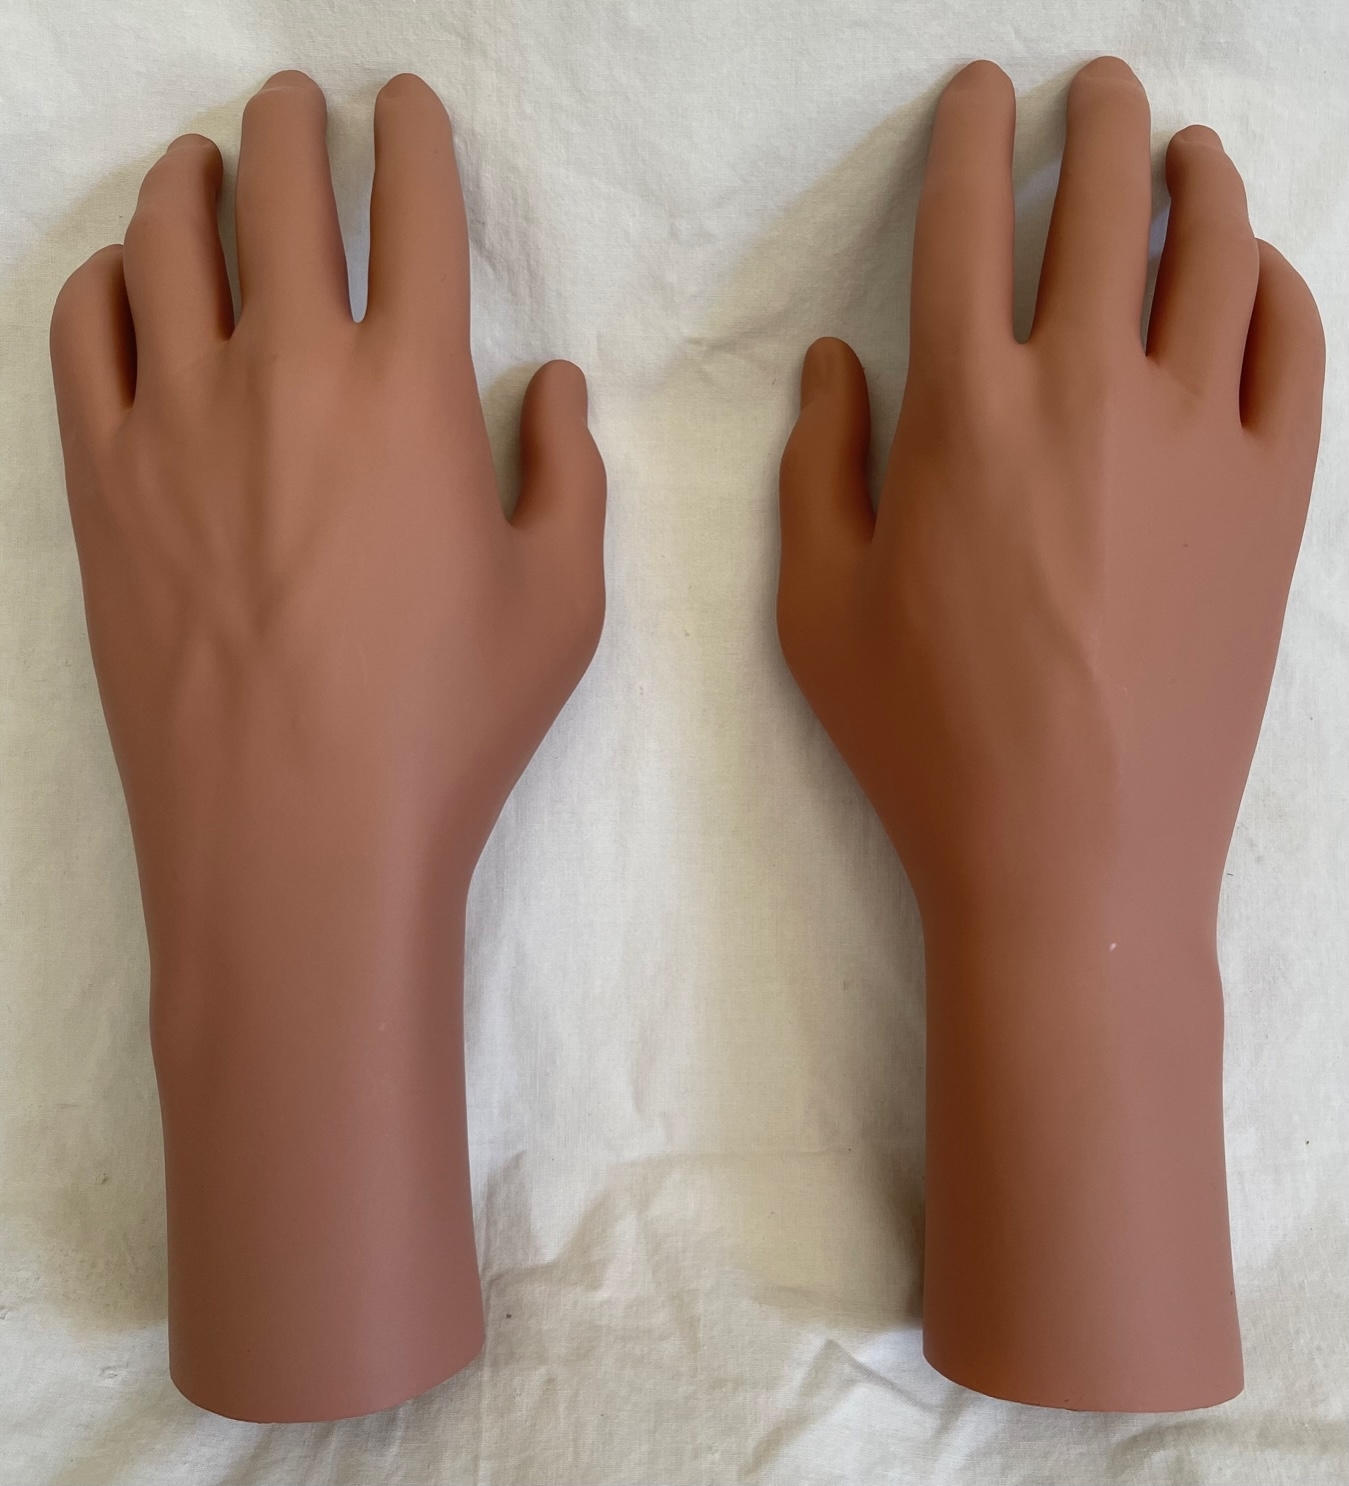 Men Lifesize Hands Soft Silicone Hand Mannequin Male Model Glove Display 1 Pair 